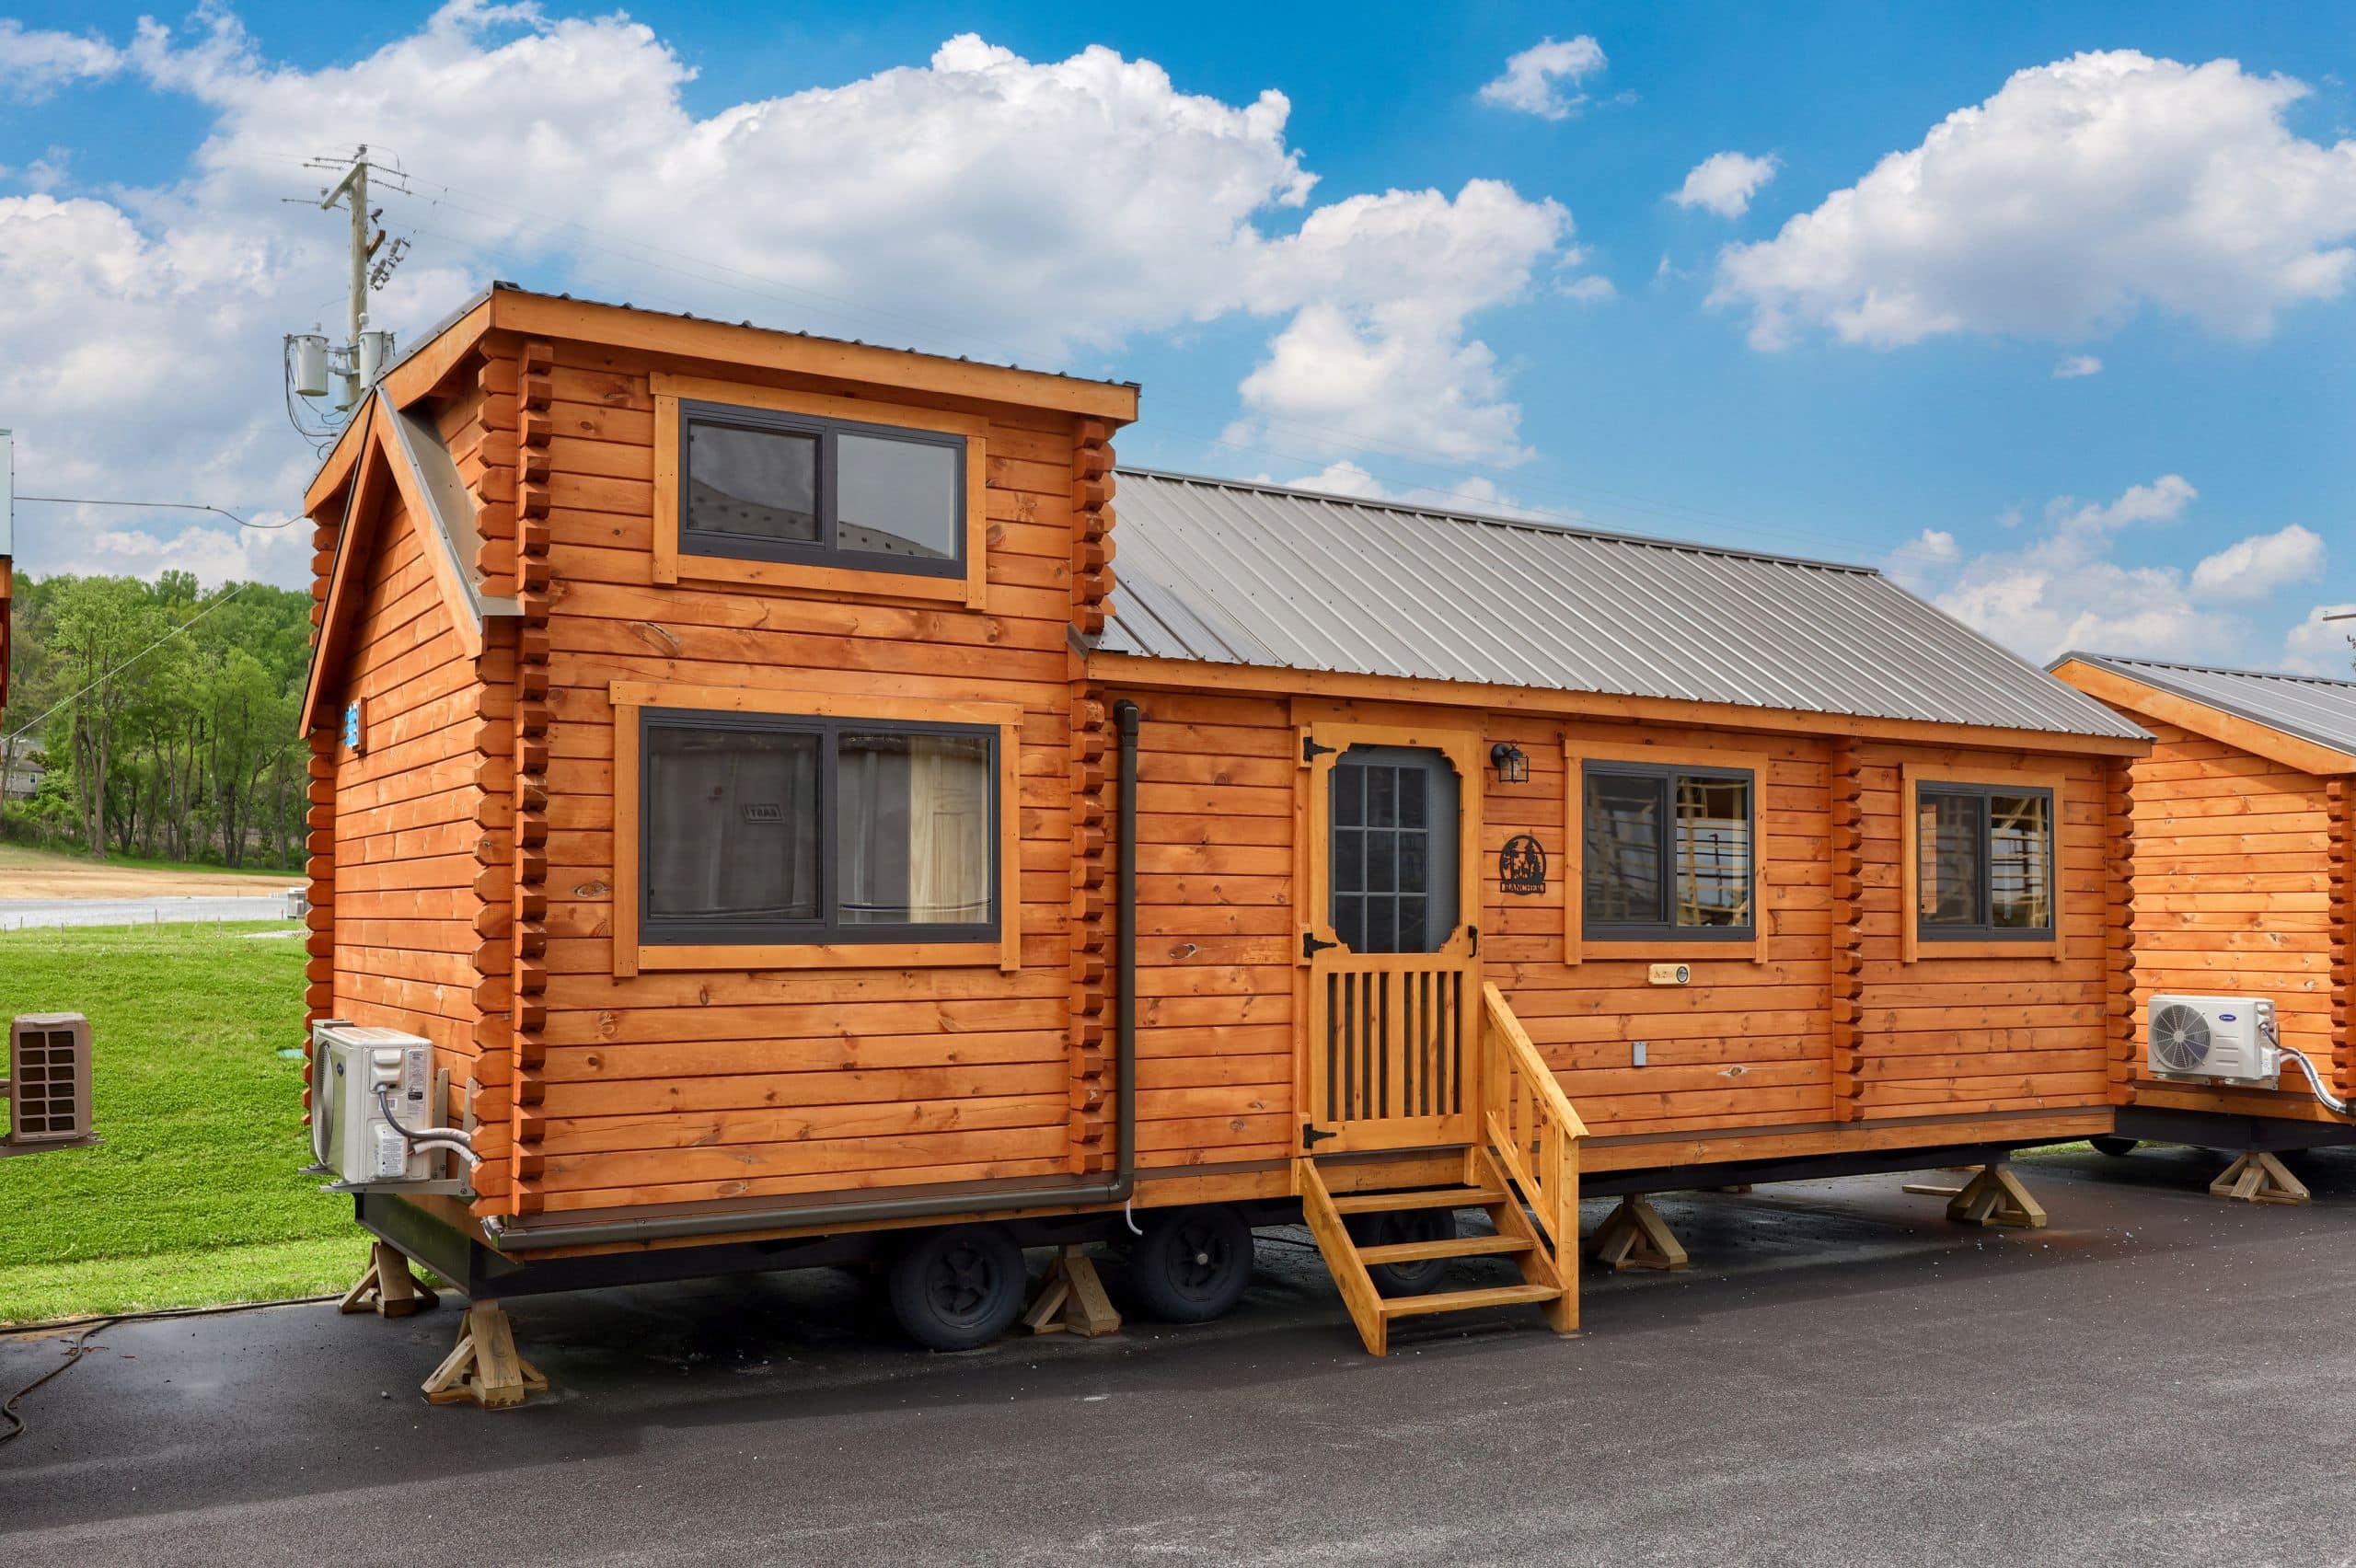 How to buy a true Tiny House on Wheels that you can move into